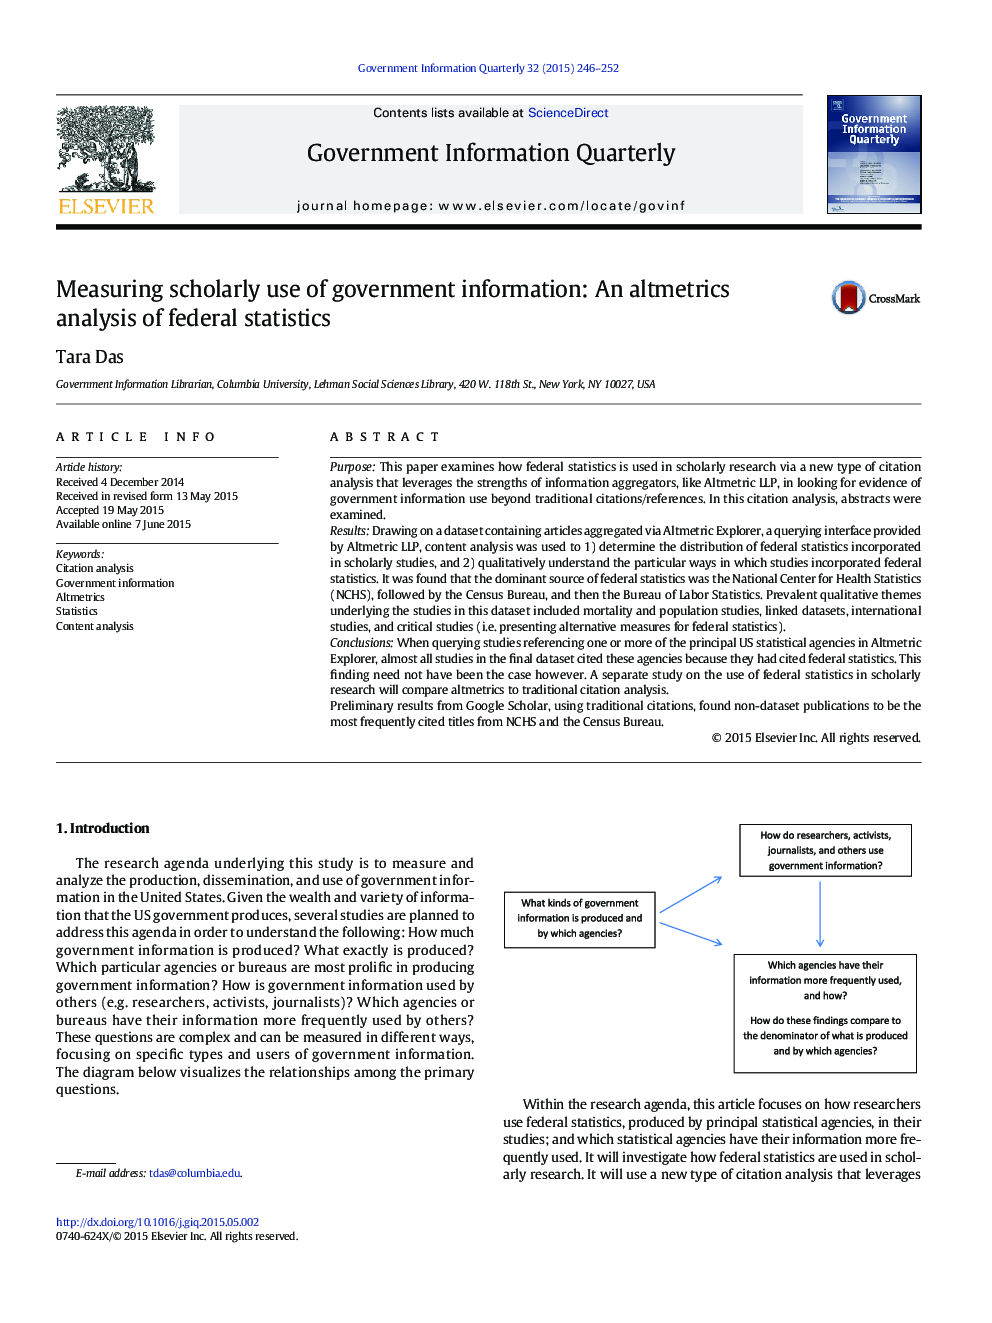 Measuring scholarly use of government information: An altmetrics analysis of federal statistics